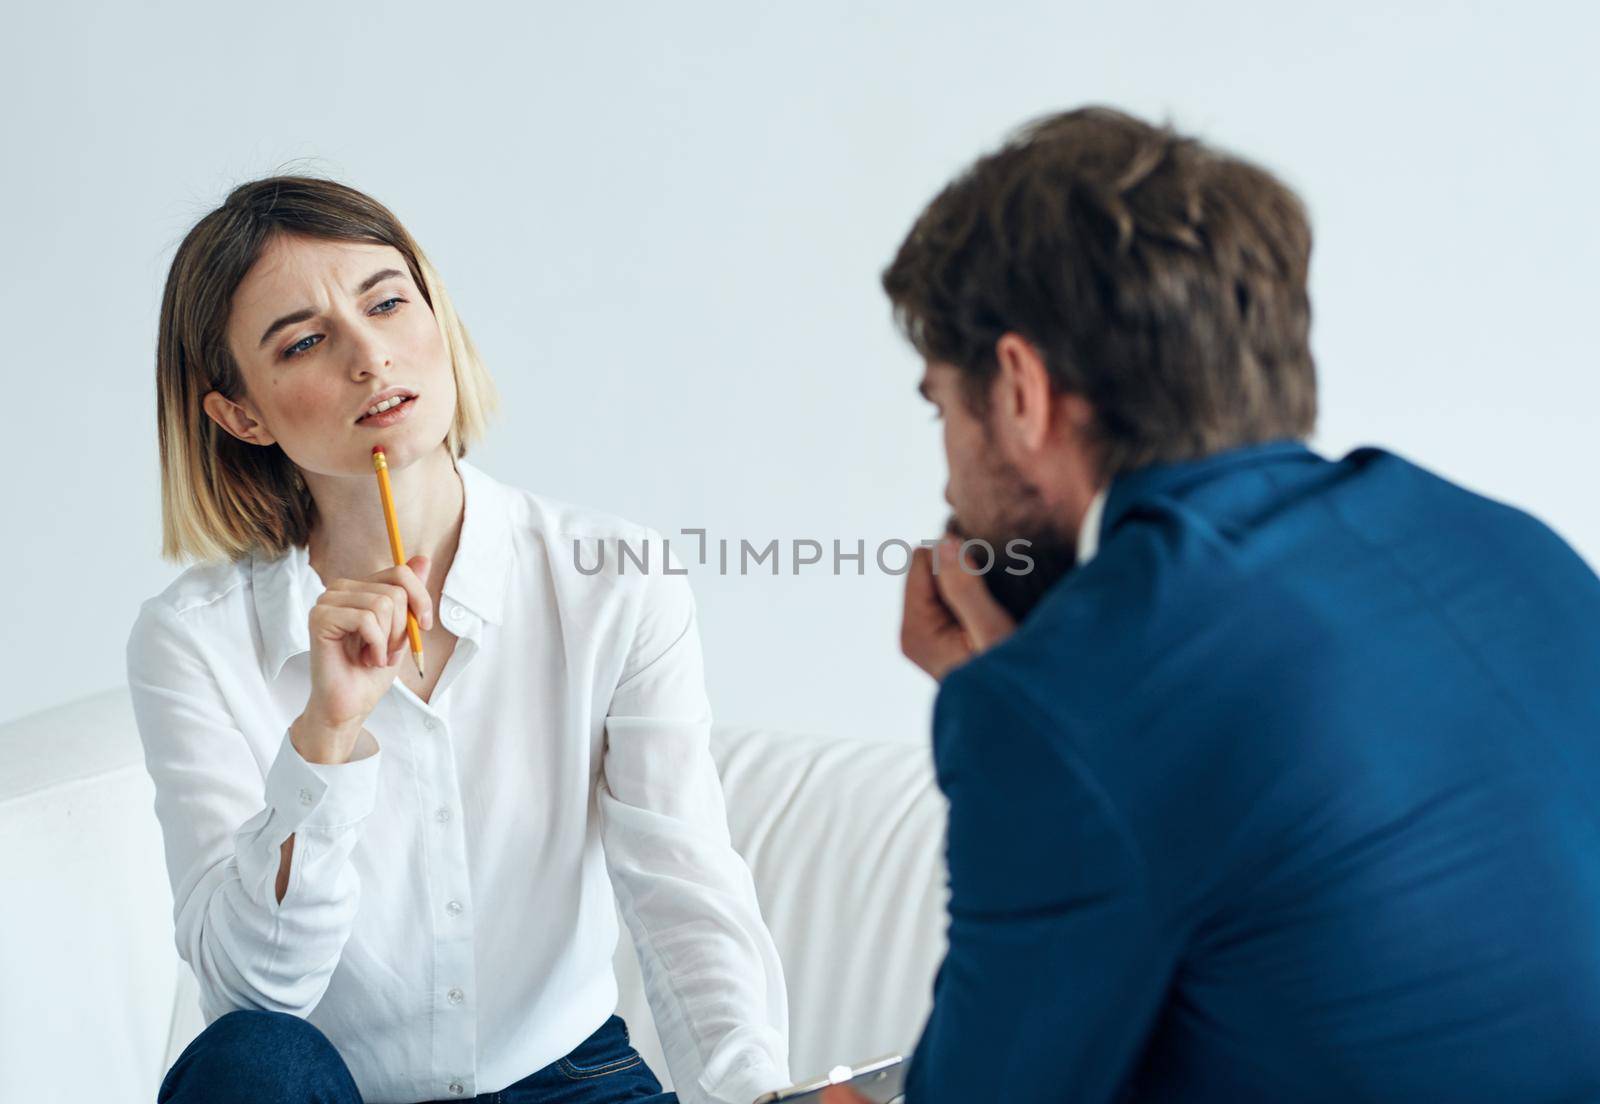 Woman on the couch and doing a man in a suit Communicating mutual understanding work. High quality photo